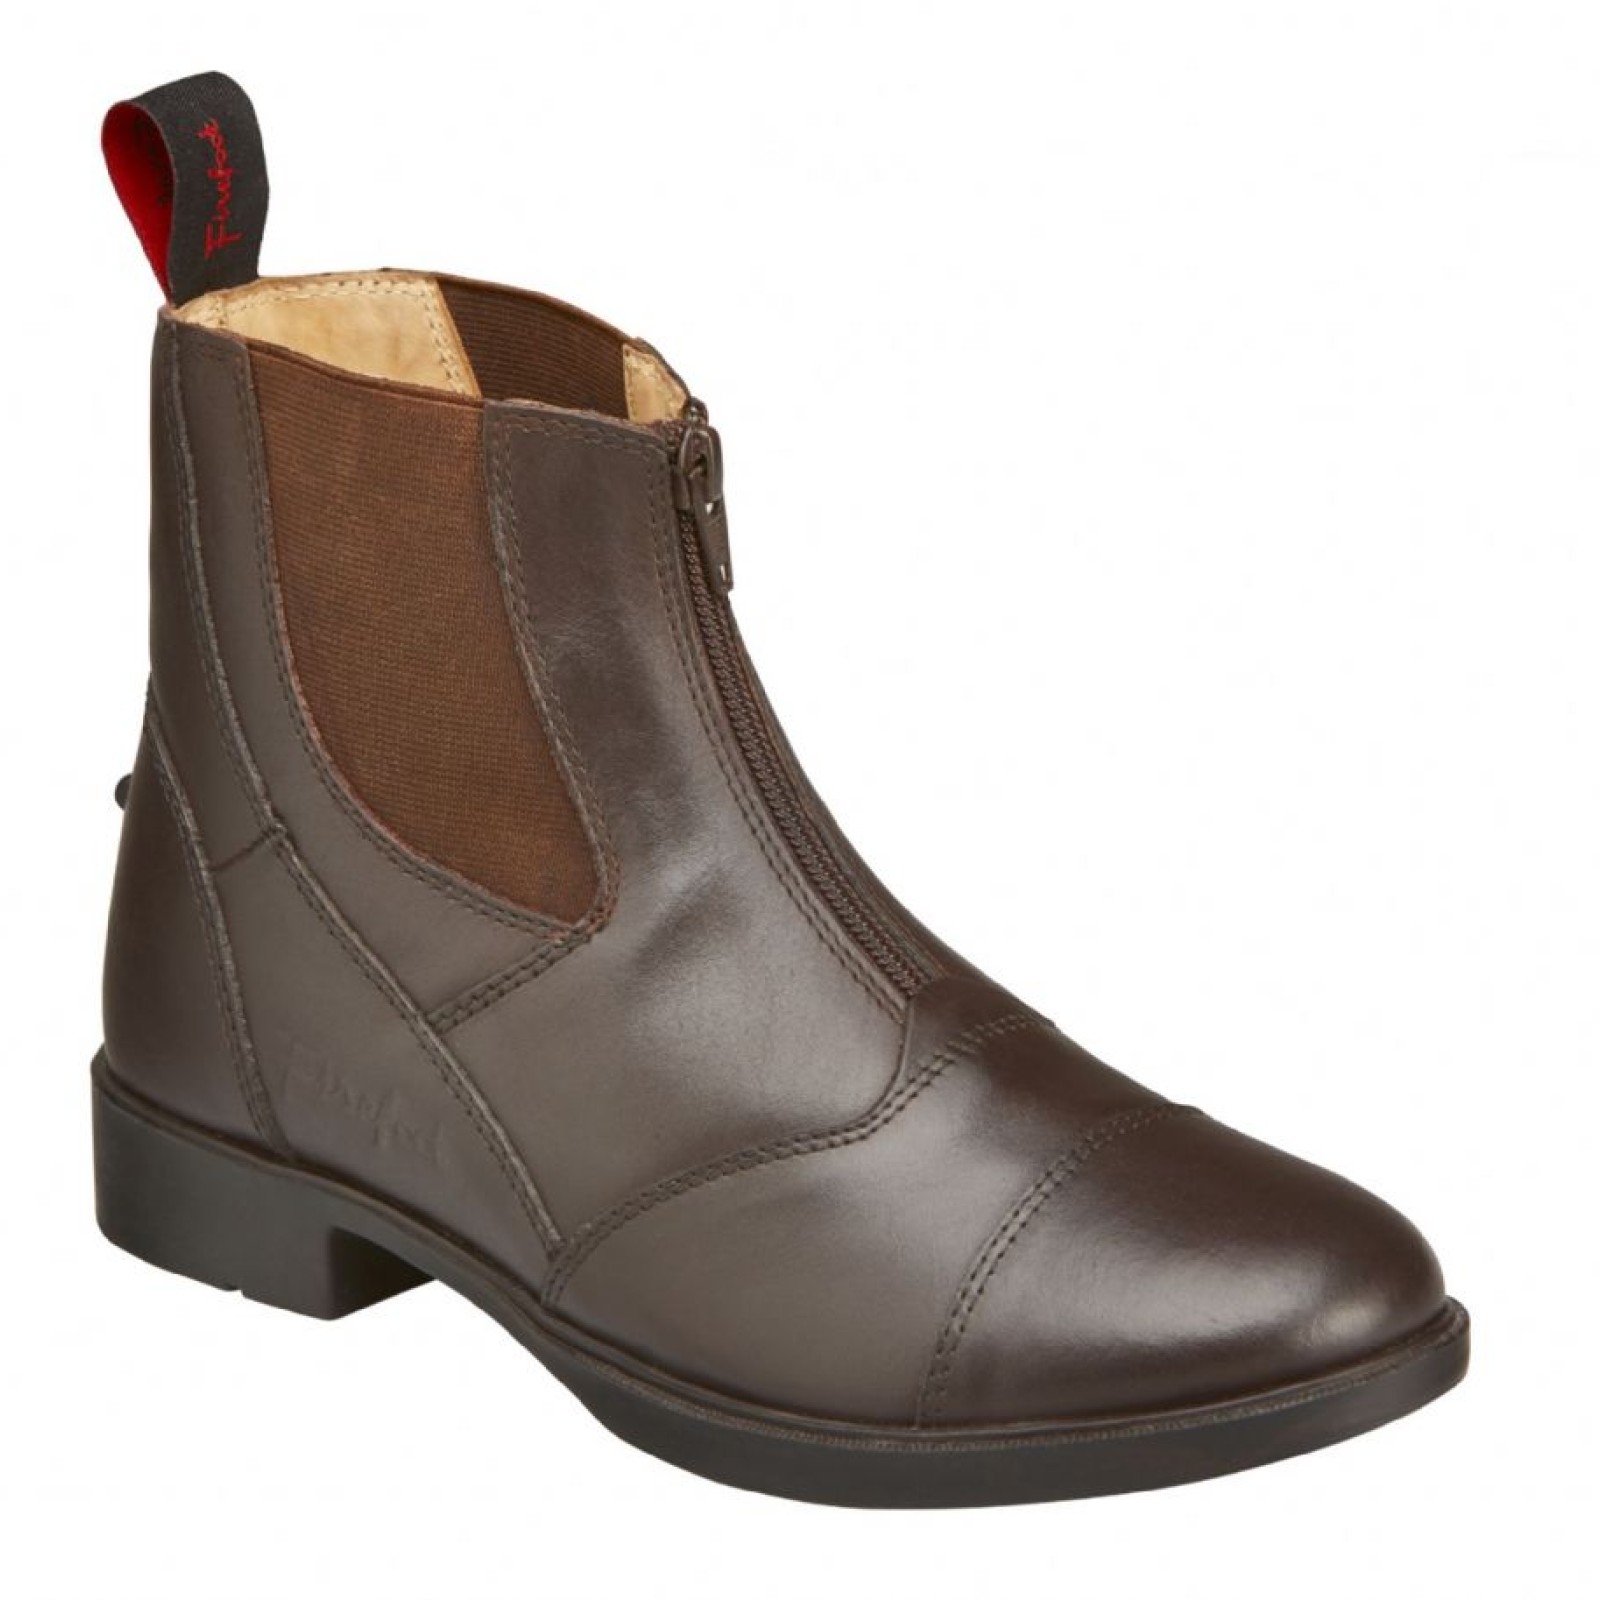 Firefoot Brown Leather Childs Zip Riding Boots